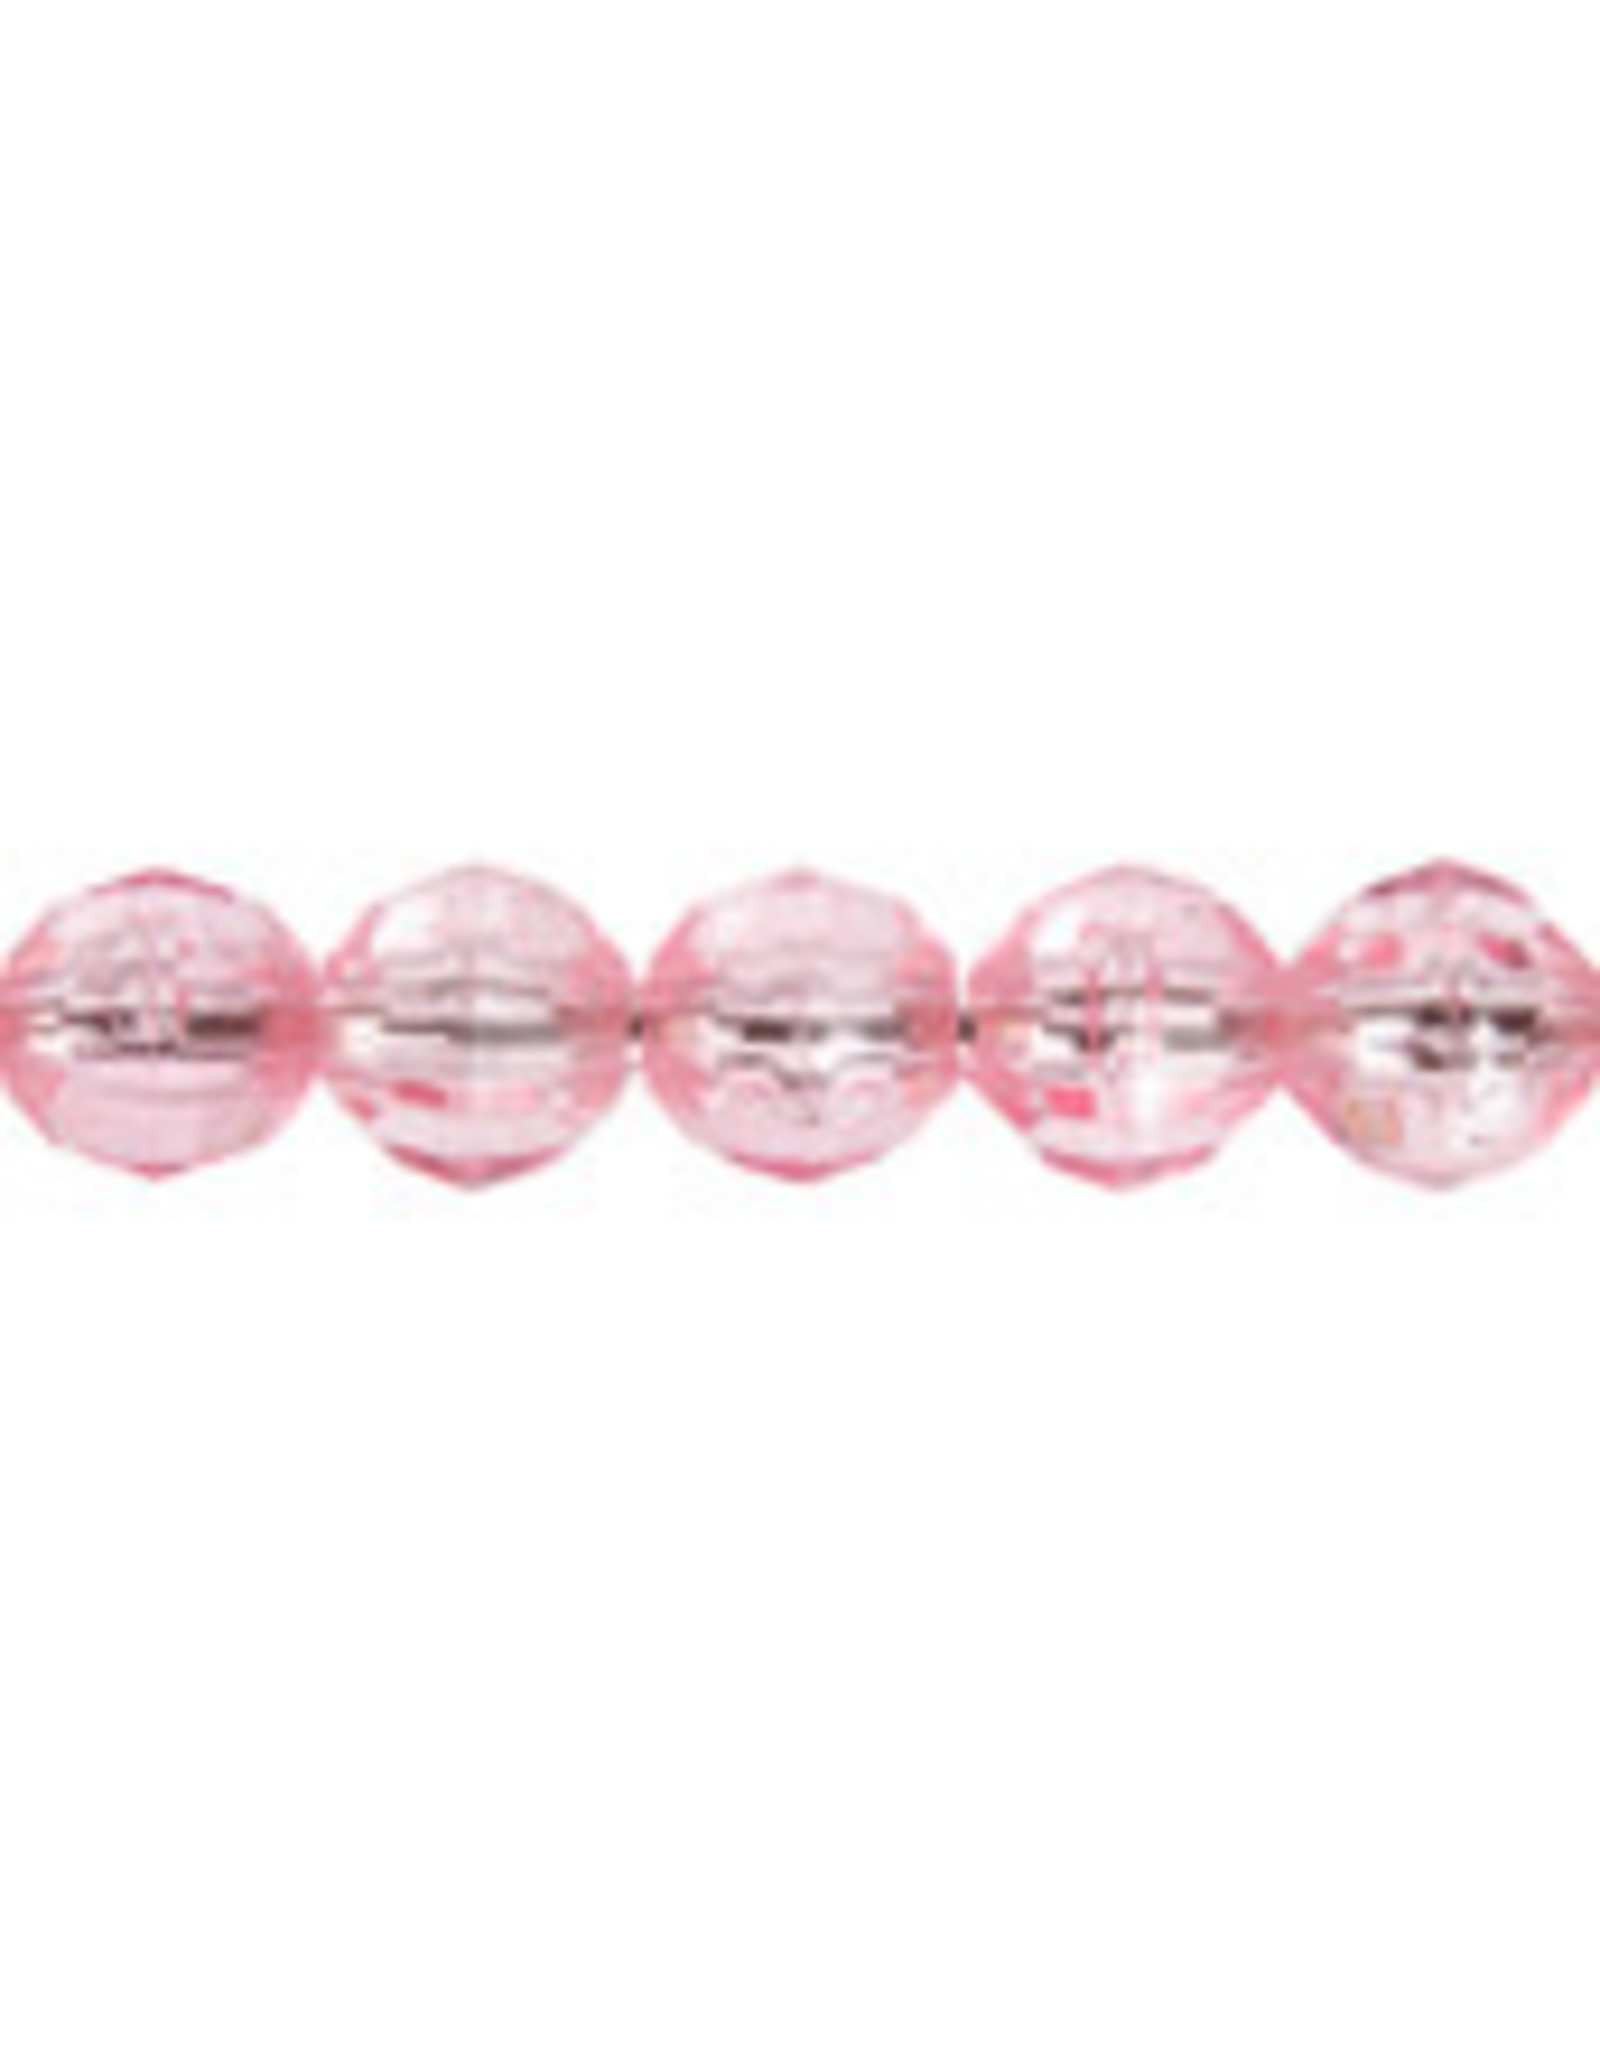 Faceted Round  6mm Transparent Pink  x500